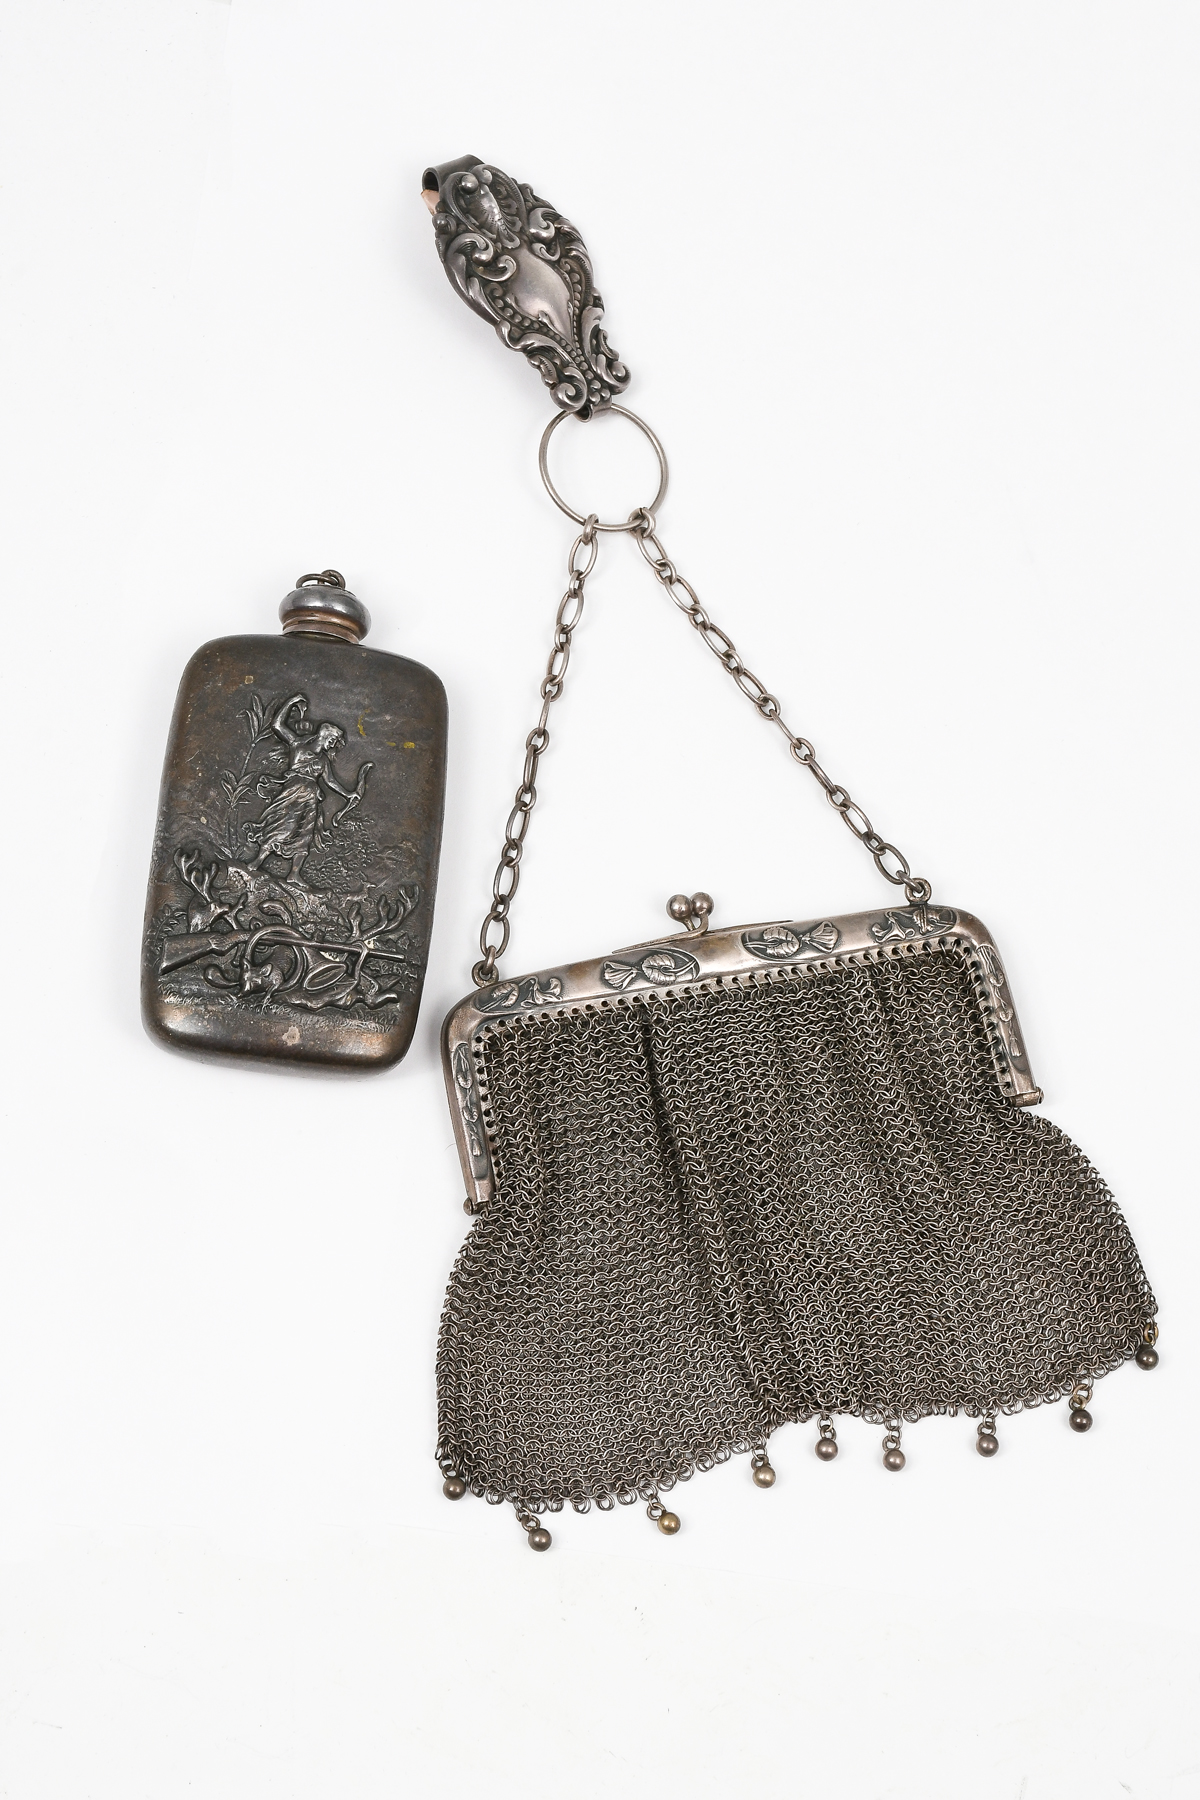 STERLING MESH PURSE AND FLASK: